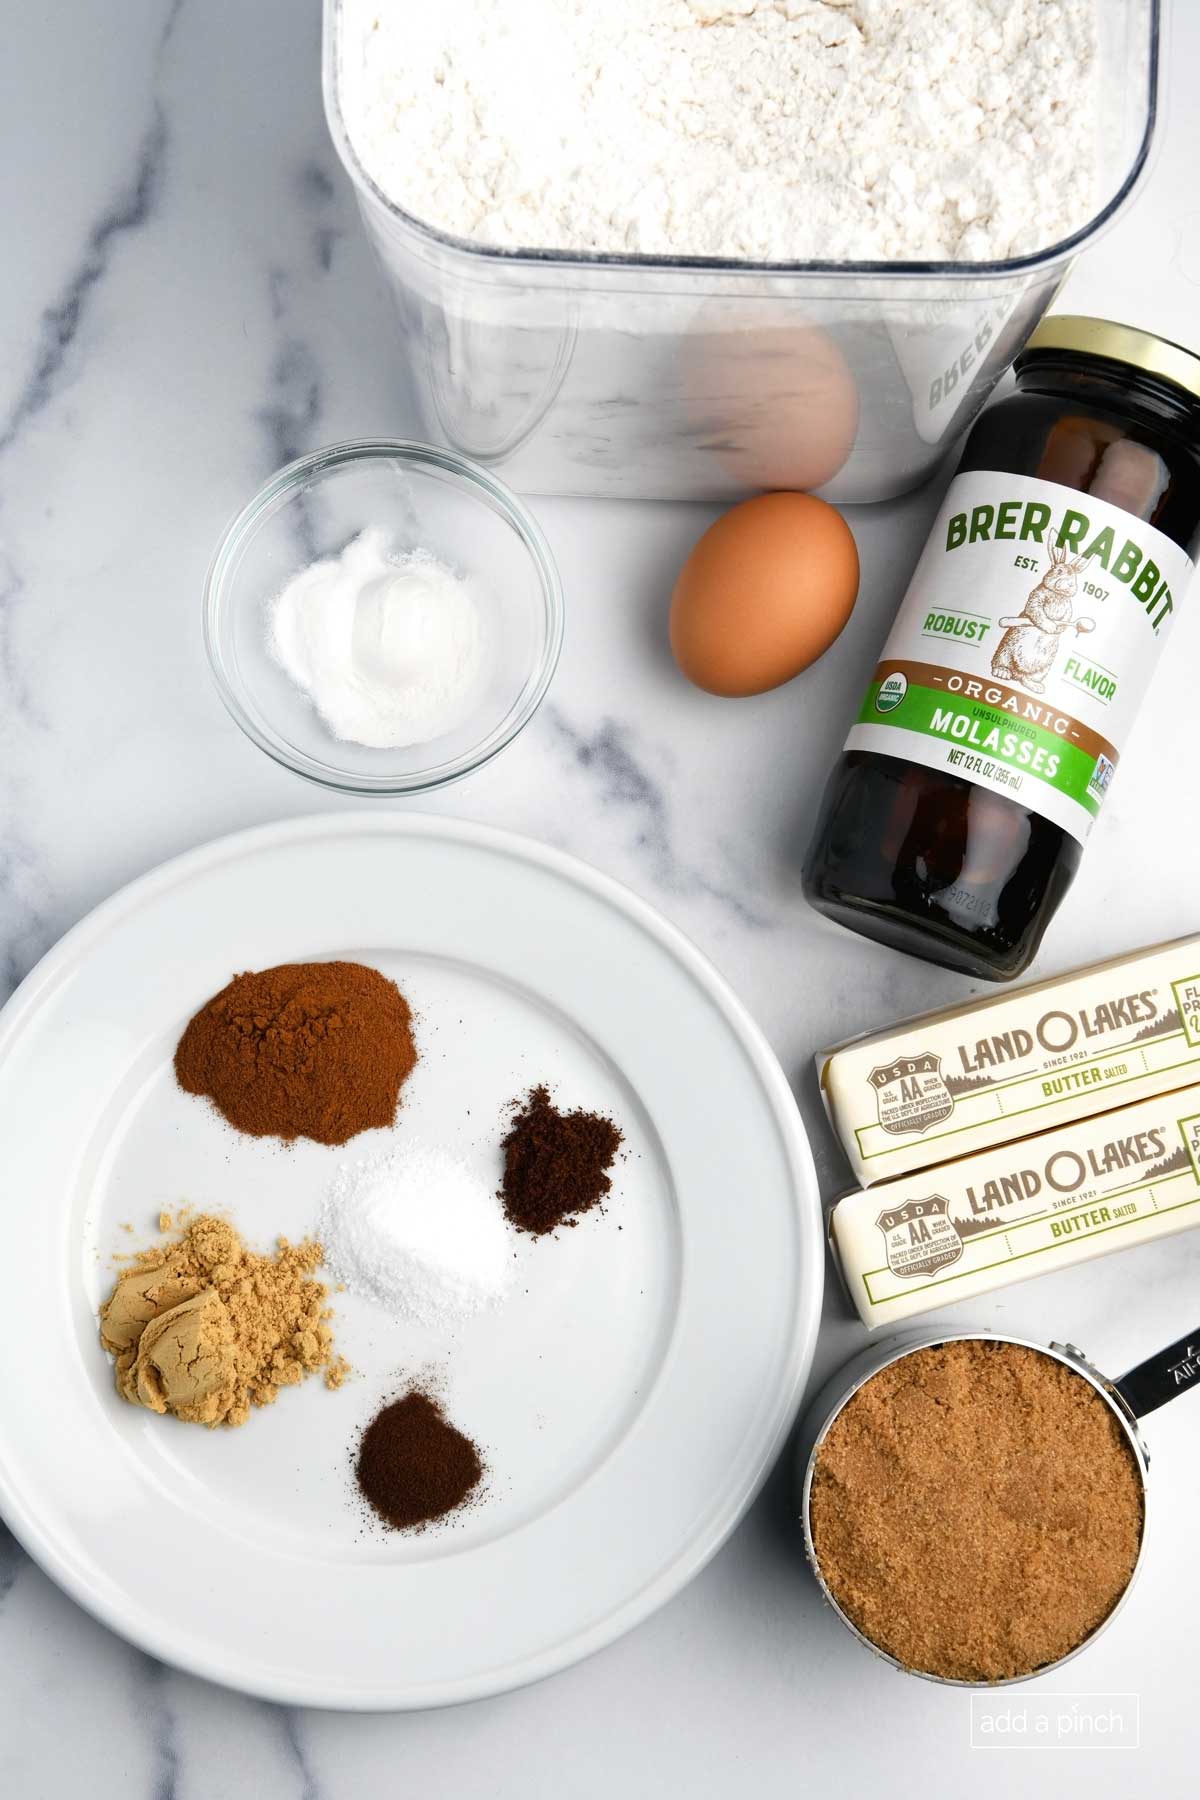 Photograph showing ingredients for making gingerbread cookie recipe.